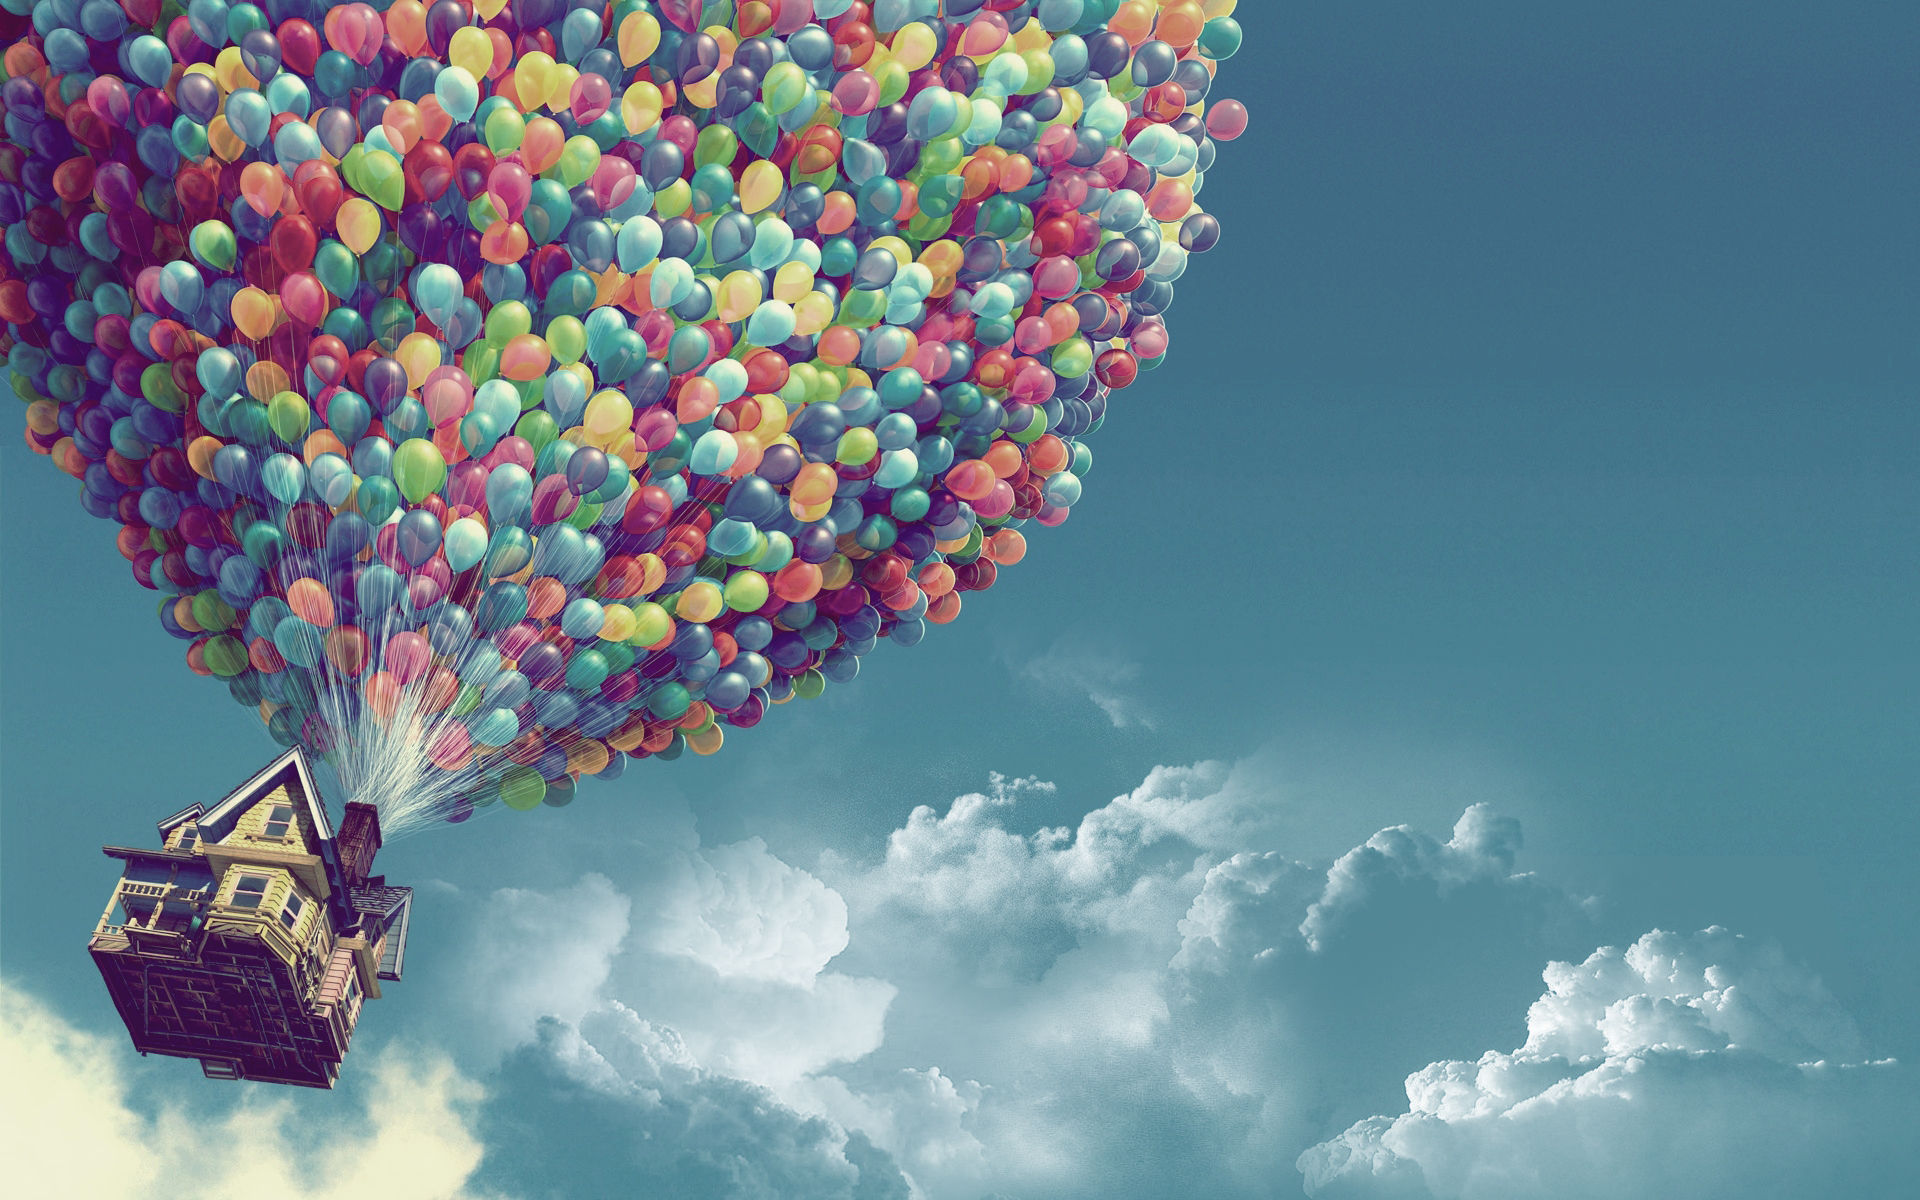 clouds, Pixar, houses, Up (movie), balloons, skyscapes - desktop wallpaper